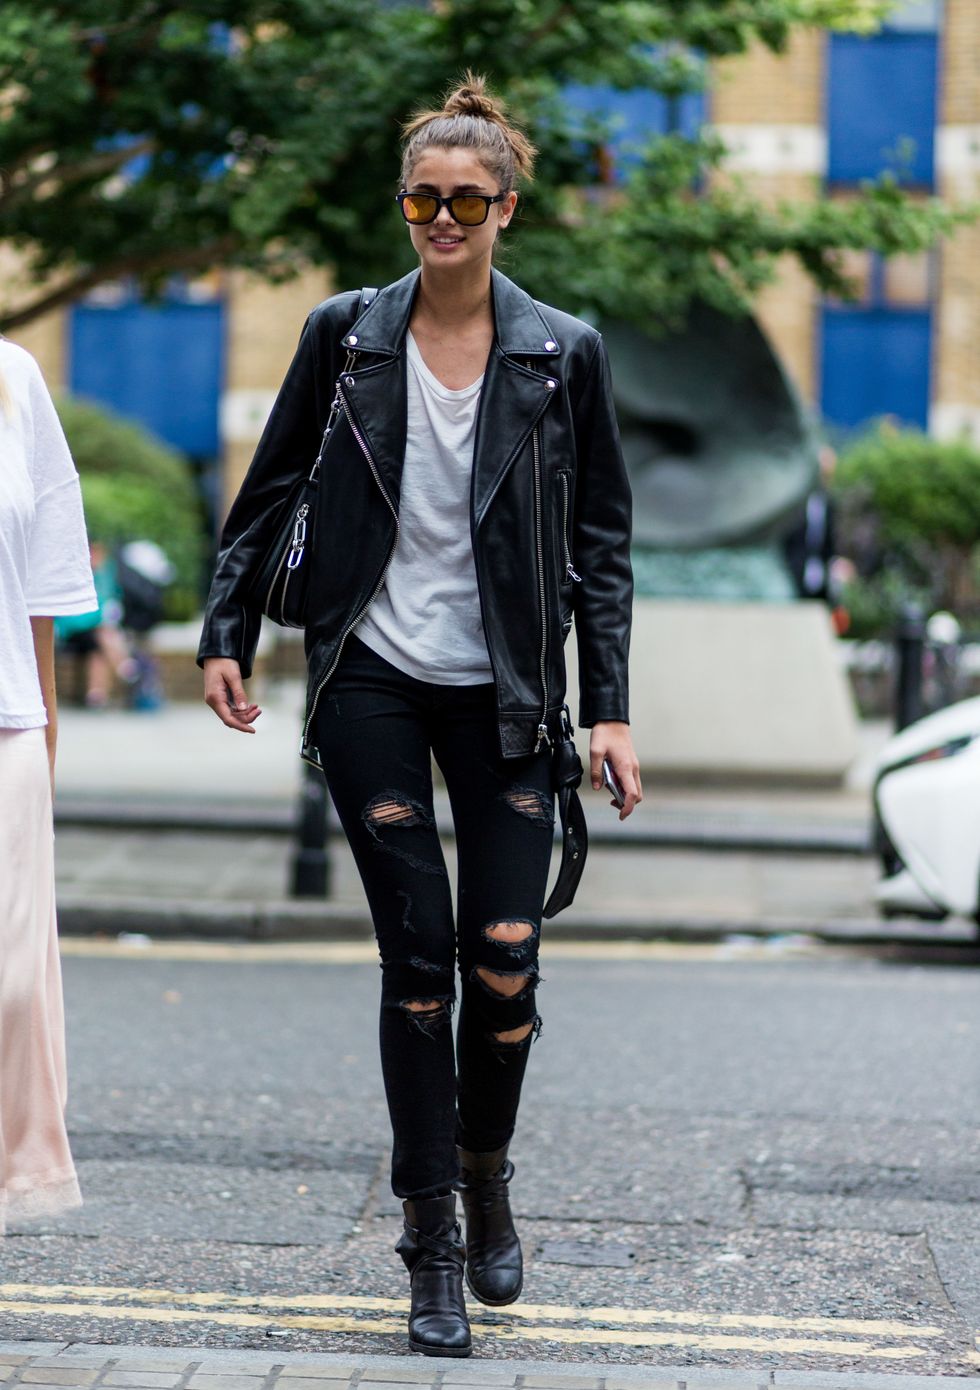 LONDON, ENGLAND - SEPTEMBER 18: Model Taylor Hill wearing black leather jacket and ripped black jeans outside Topshop during London Fashion Week Spring/Summer collections 2017 on September 18, 2016 in London, United Kingdom. (Photo by Christian Vierig/Getty Images)